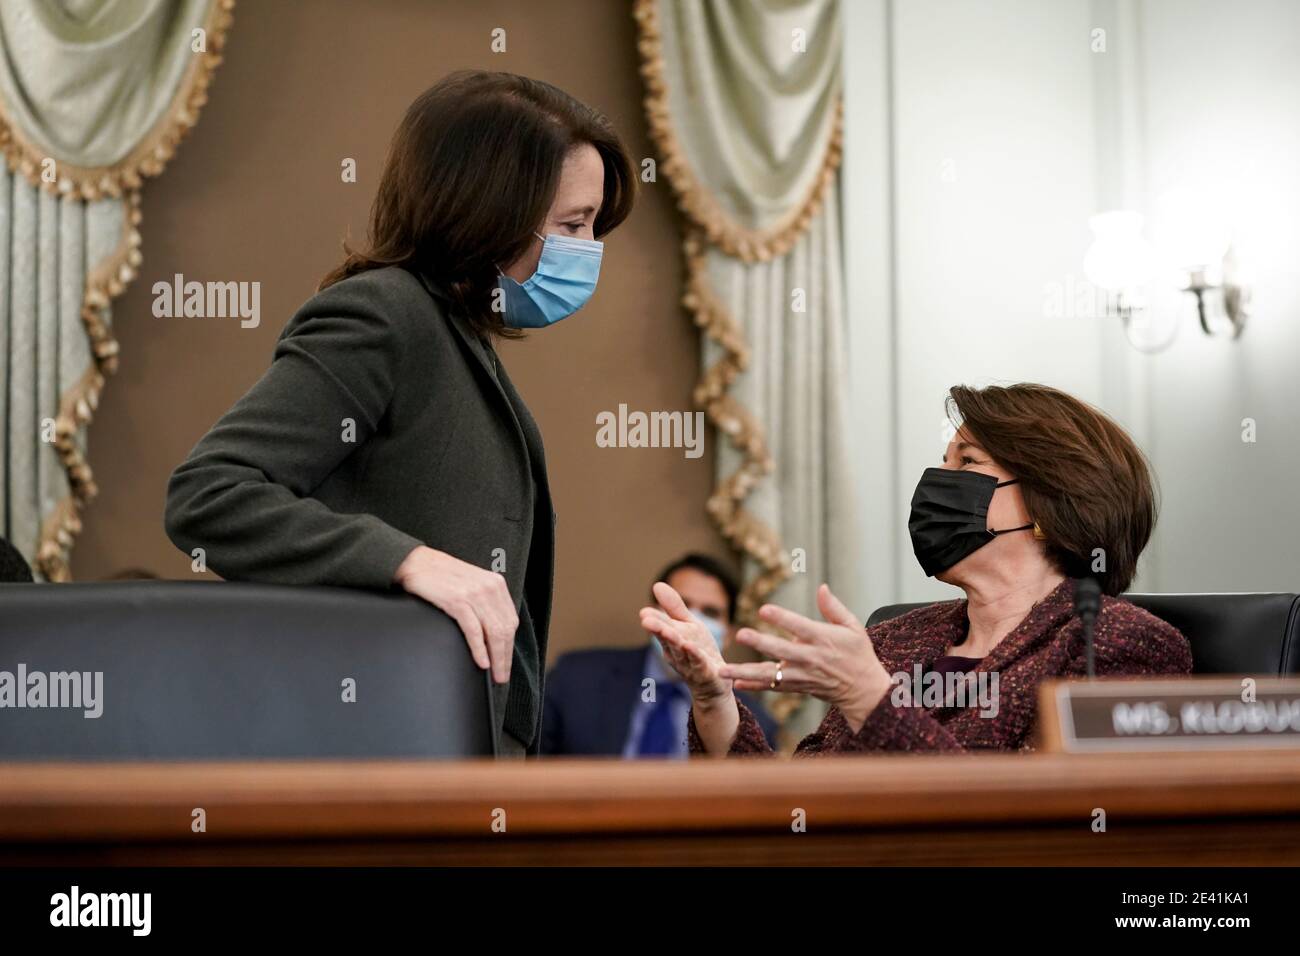 United States Senator Maria Cantwell (Democrat of Oregon), Ranking Member, US Senate Committee on Commerce, Science, & Transportation, left, and US Senator Amy Klobuchar (Democrat of Minnesota), wear protective masks while talking during a confirmation hearing for U.S. Secretary of Transportation nominee Pete Buttigieg in Washington, DC, U.S., on Thursday, Jan. 21, 2021. Buttigieg, is pledging to carry out the administration's ambitious agenda to rebuild the nation's infrastructure, calling it a 'generational opportunity' to create new jobs, fight economic inequality and stem climate change. Stock Photo